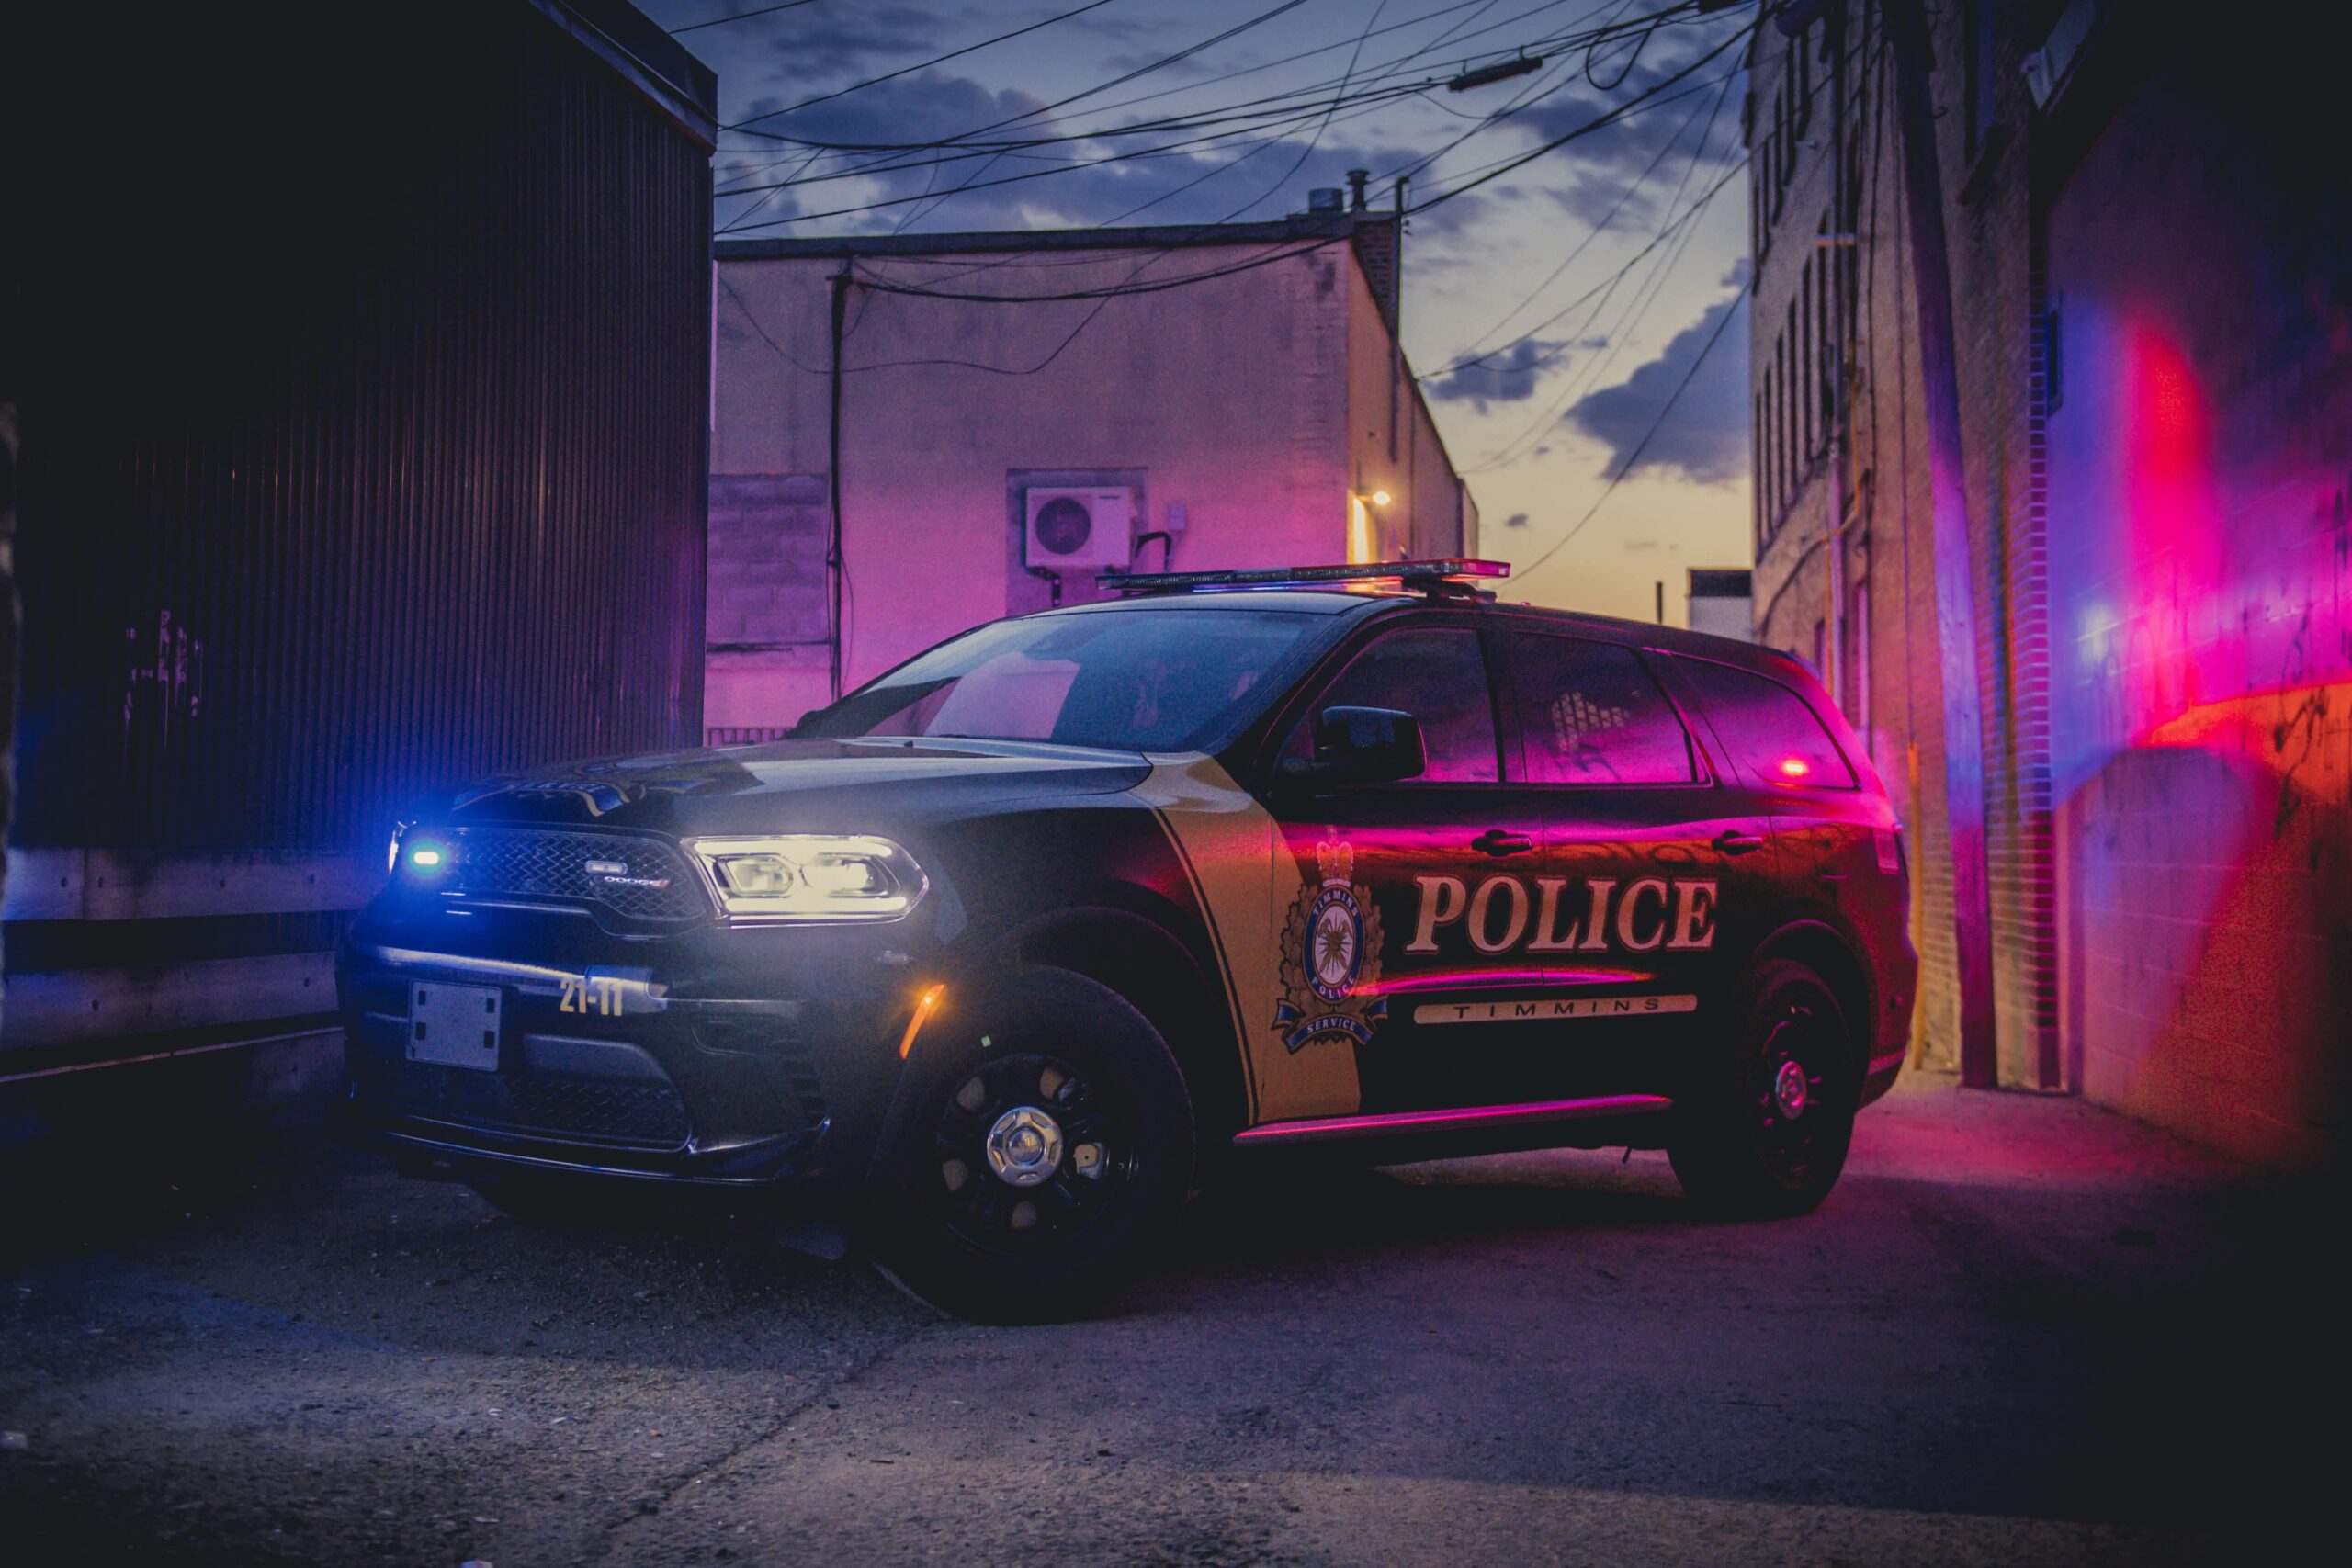 Timmins Police A Timmins police car parked in a dark alley in Timmins, Ontario.